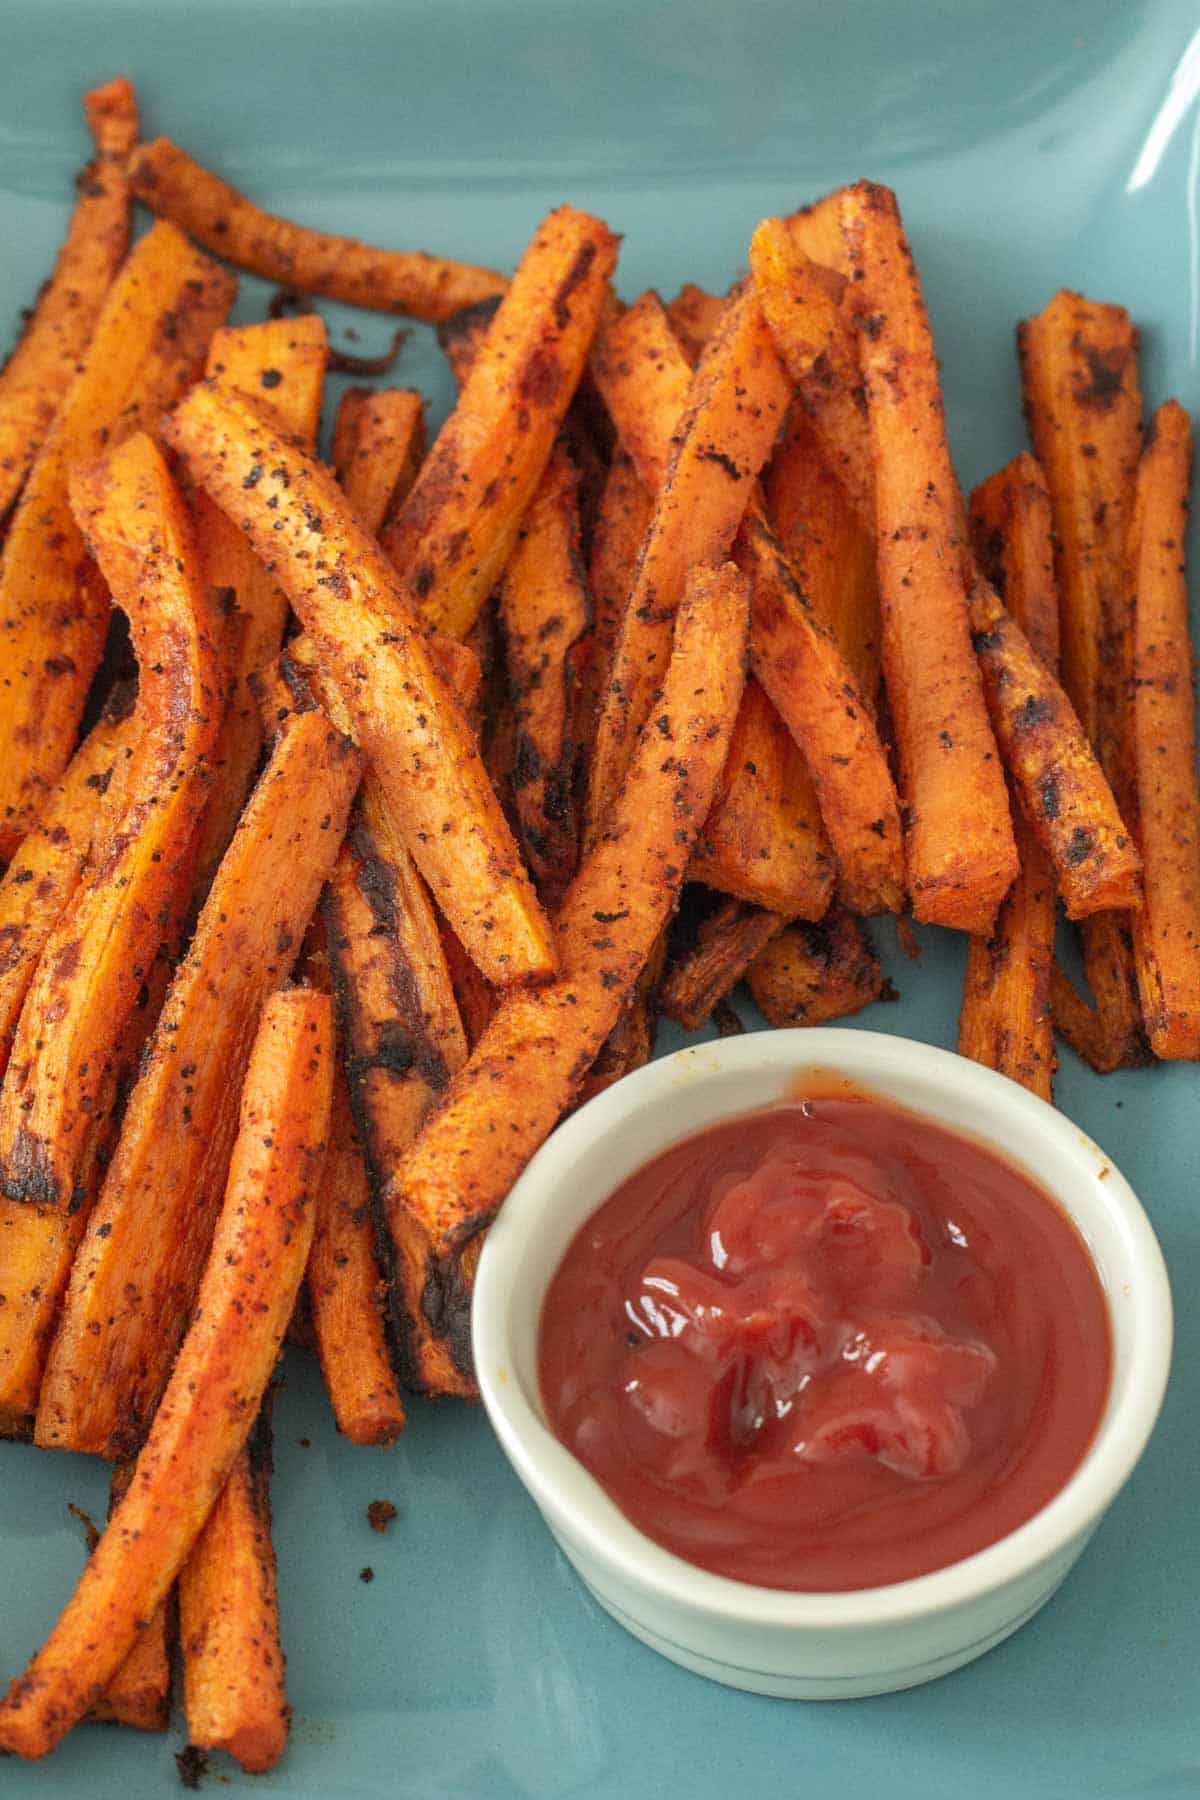 plate of carrot fries with ketchup